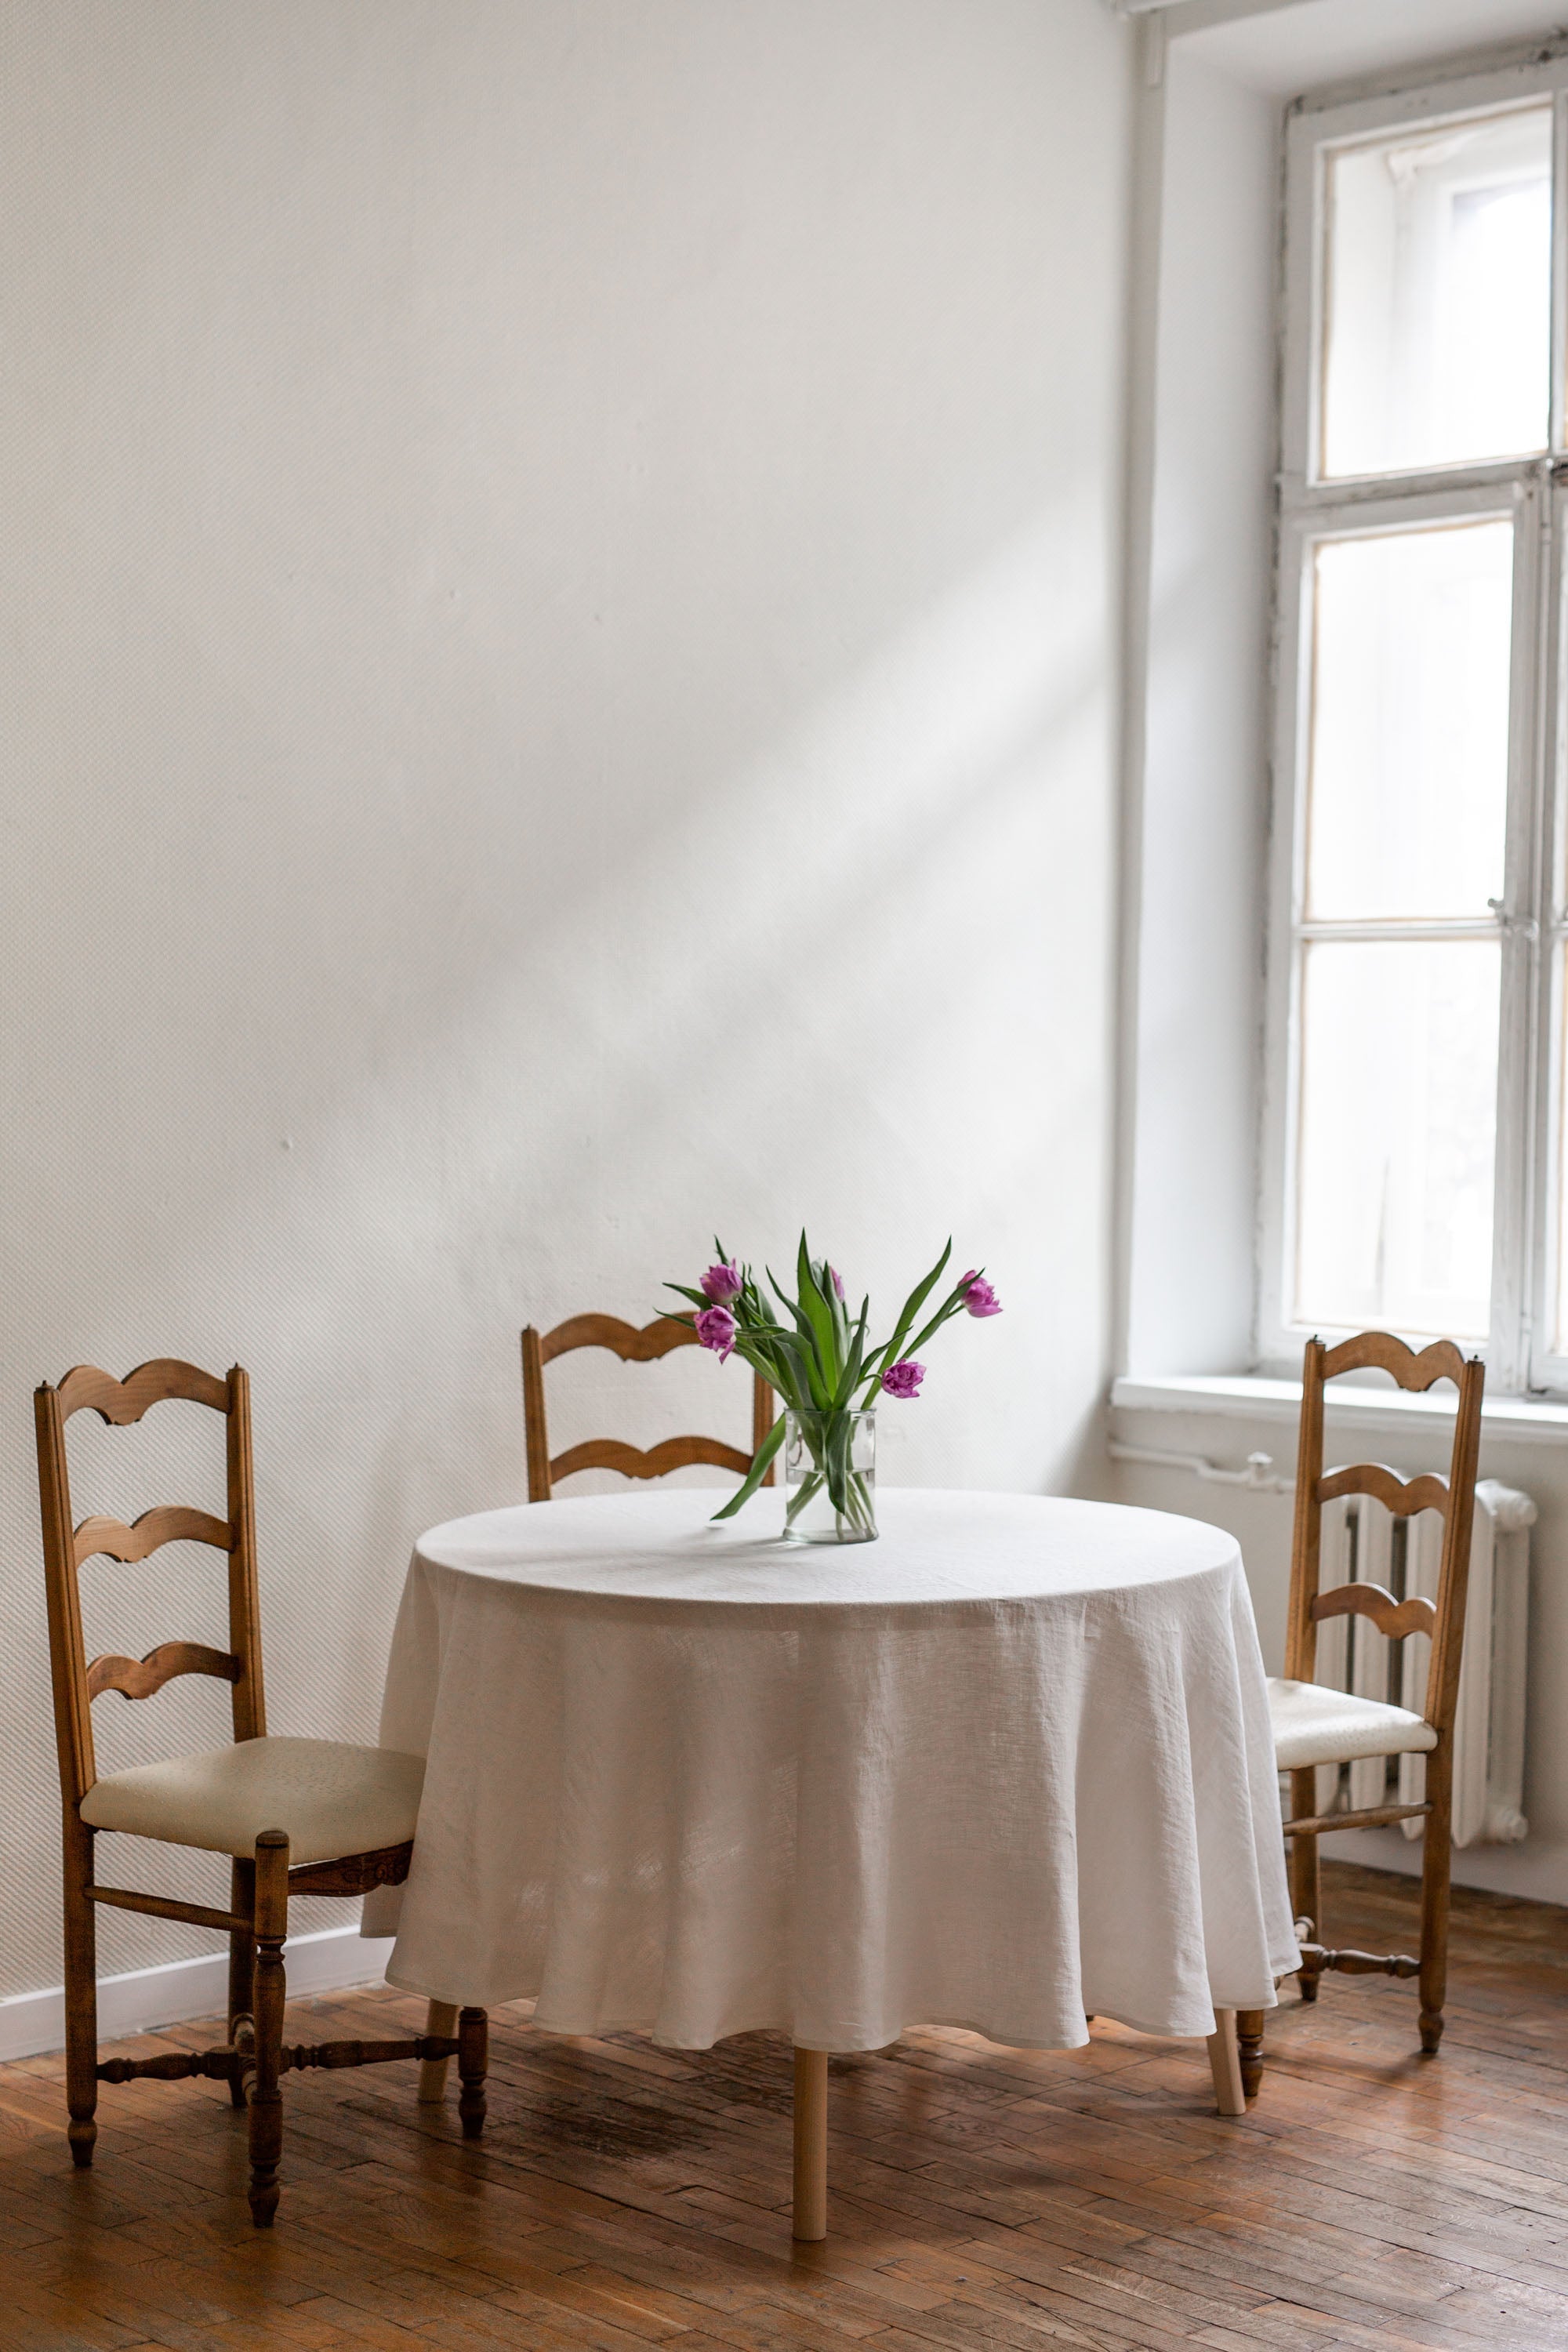 A Rustic Dinner Table With White Linen Tablecloth By AmourlInen